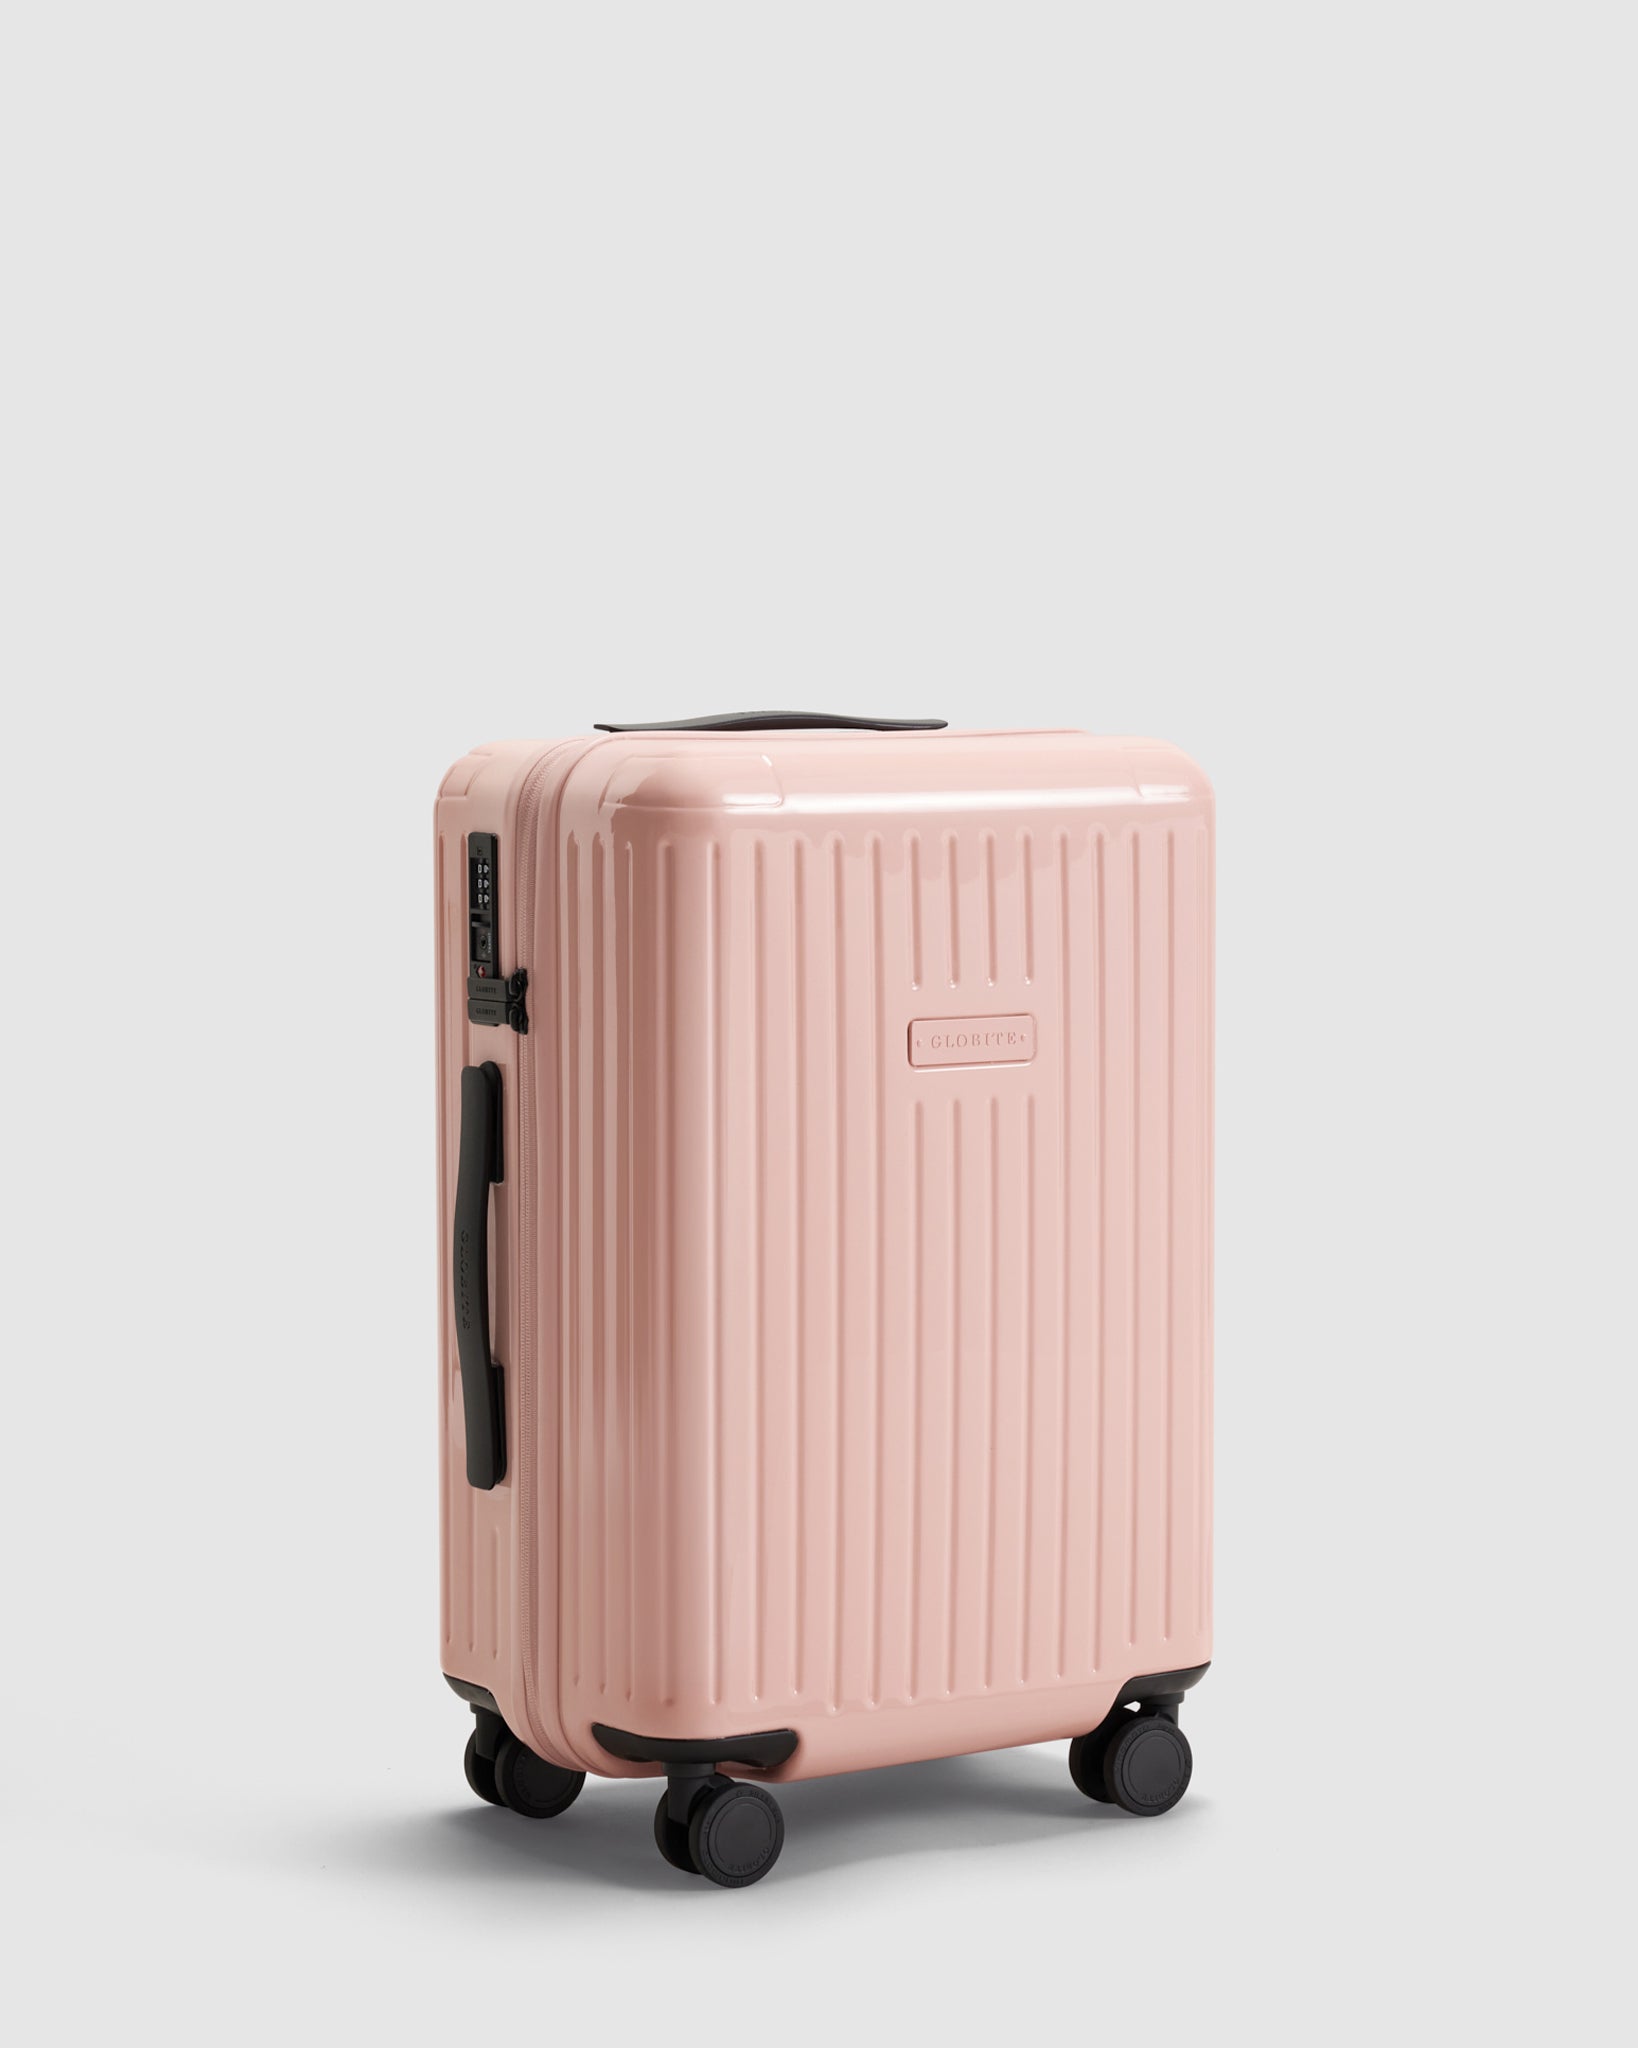 Journey Carry On Luggage - Whisper Pink